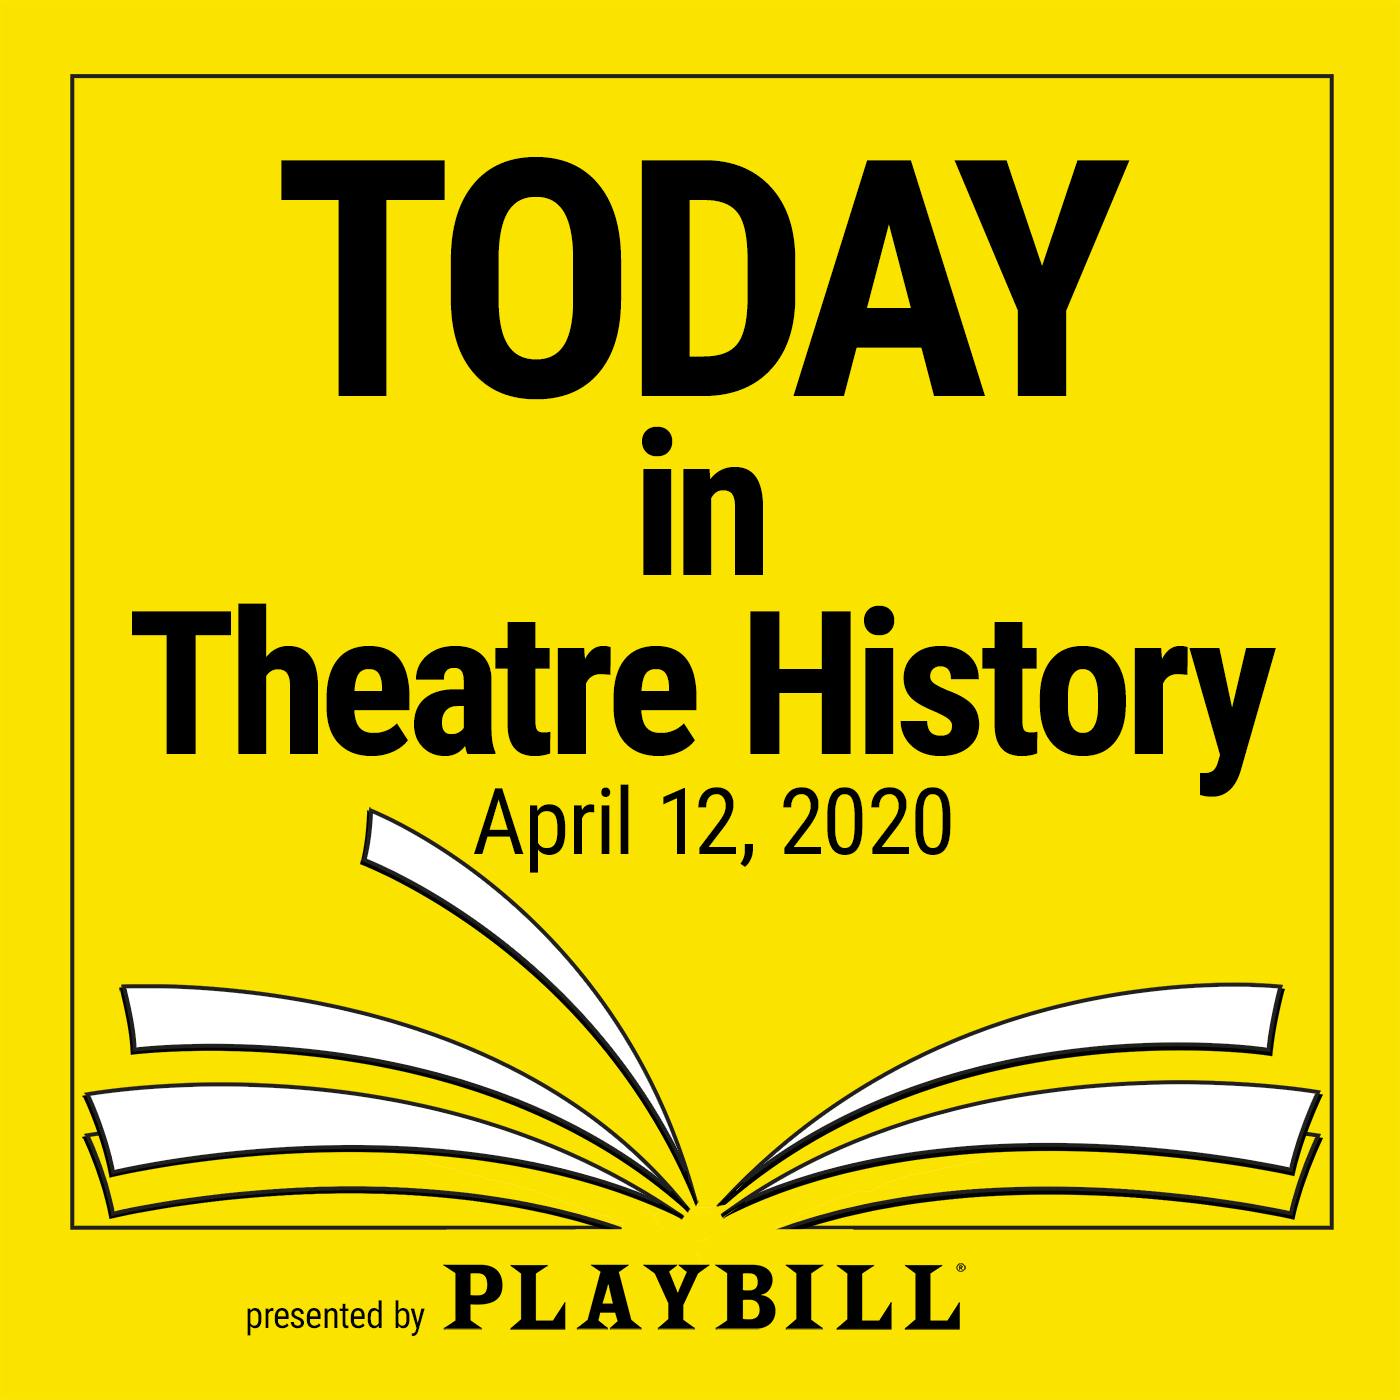 April 12, 2020: Jessica Lange makes her Broadway debut and Ann Miller celebrates her birthday and more